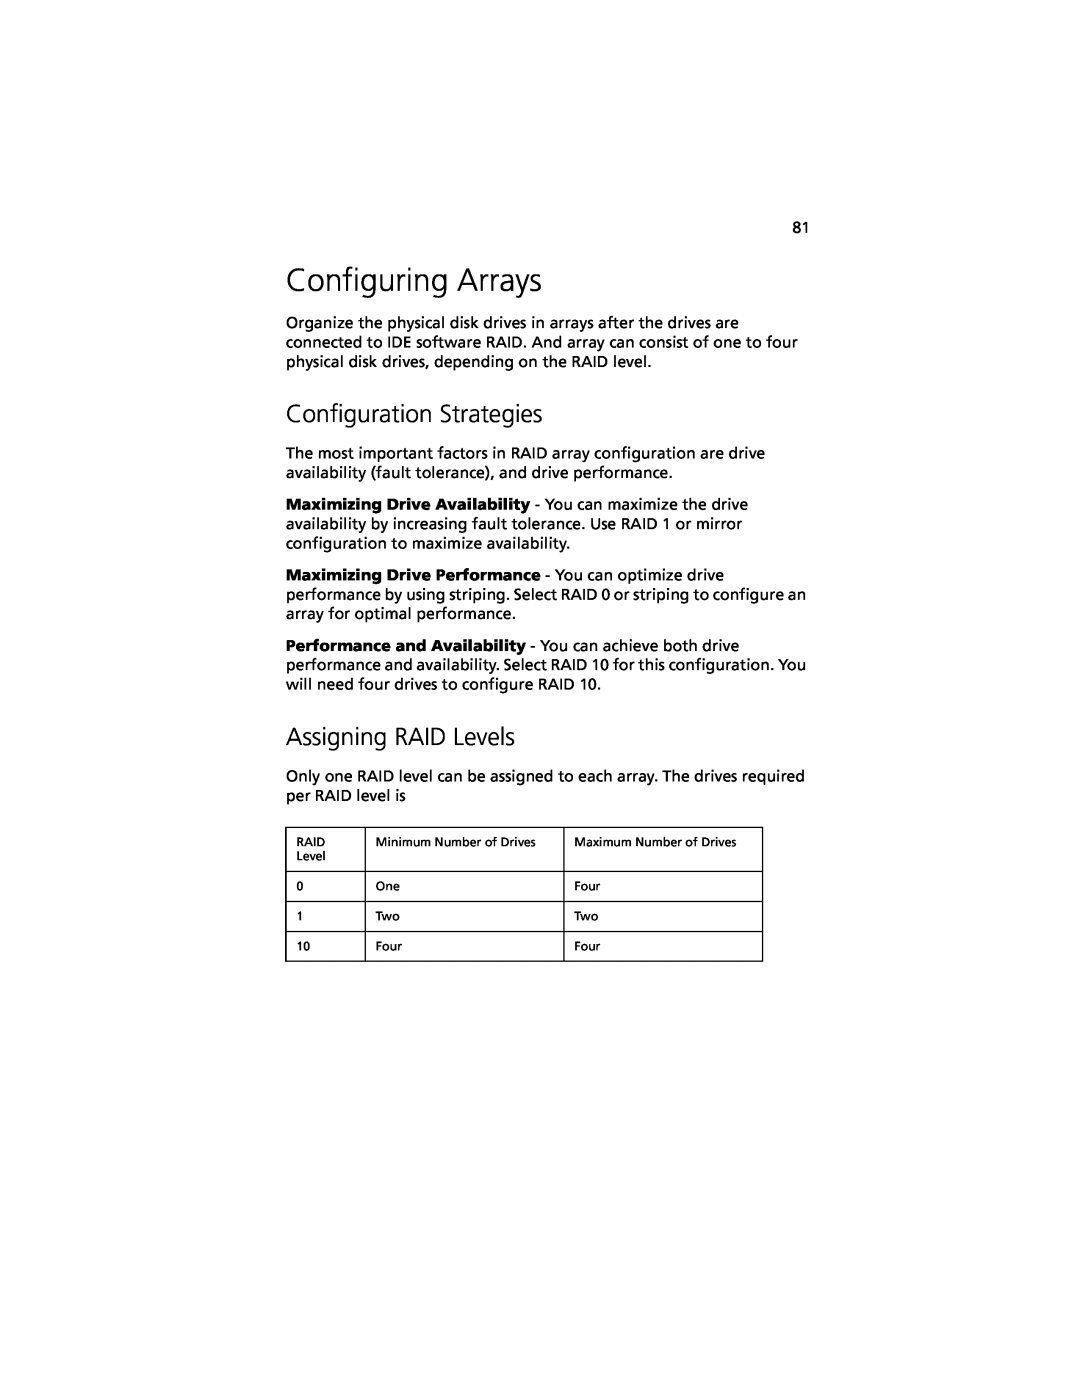 Acer G301 manual Configuring Arrays, Configuration Strategies, Assigning RAID Levels 